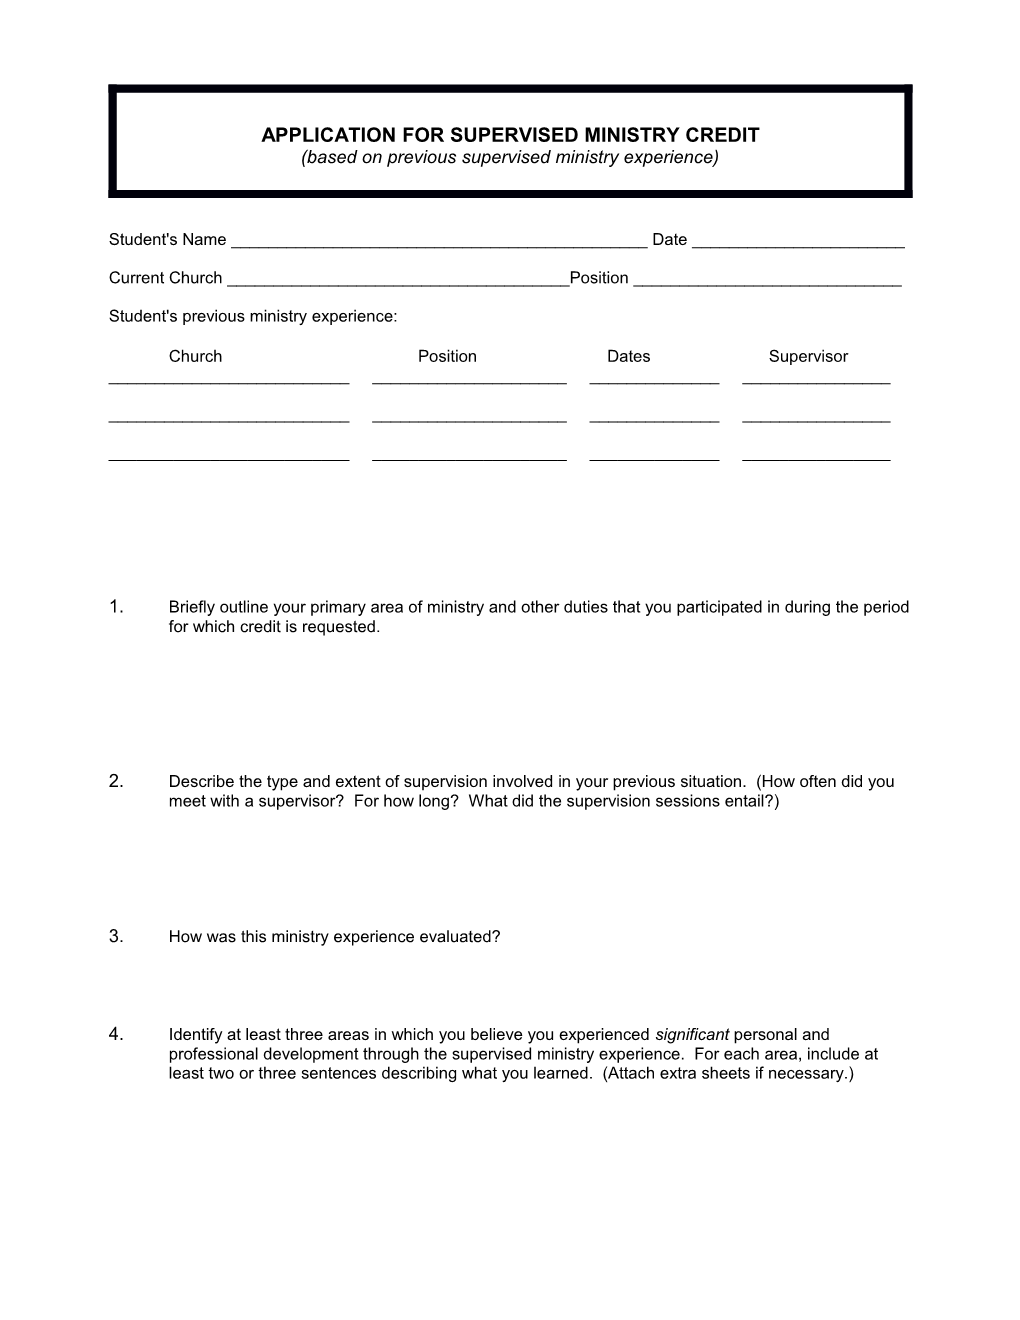 Application for Supervised Ministry Credit